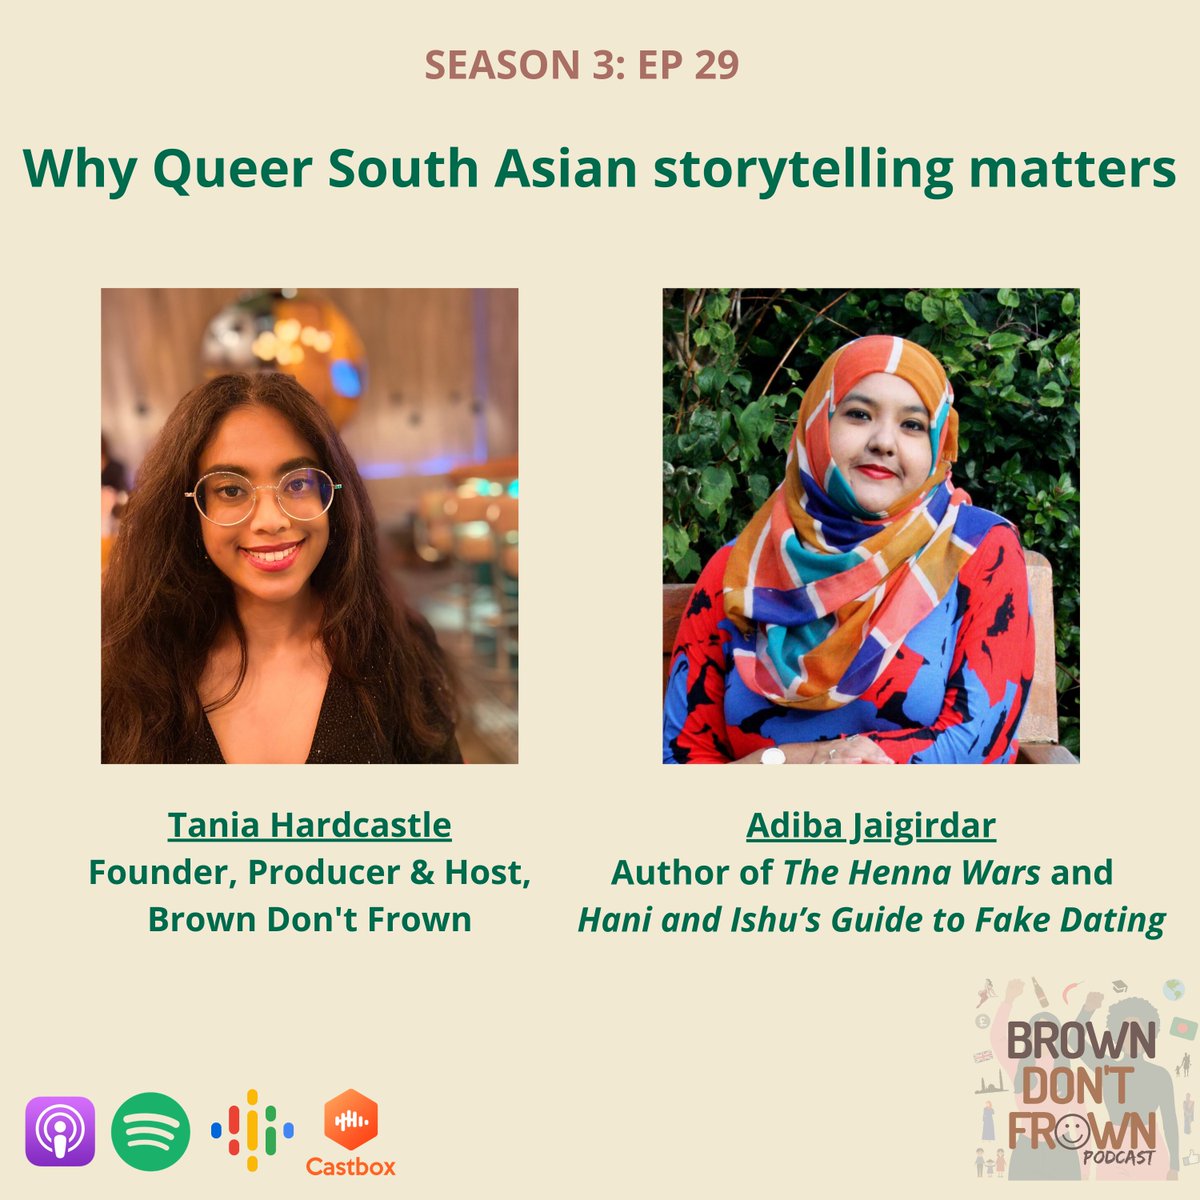 📣 #Podcast EP 29 w/ @adiba_j is finally here! Adiba is the author of 'The Henna Wars', and 'Hani and Ishu’s Guide to Fake Dating'. She shares with us her journey from Bangladesh, to Saudi Arabia to Ireland, her sense of identity & belonging + her motivations for writing. 🙌🏾 🌈